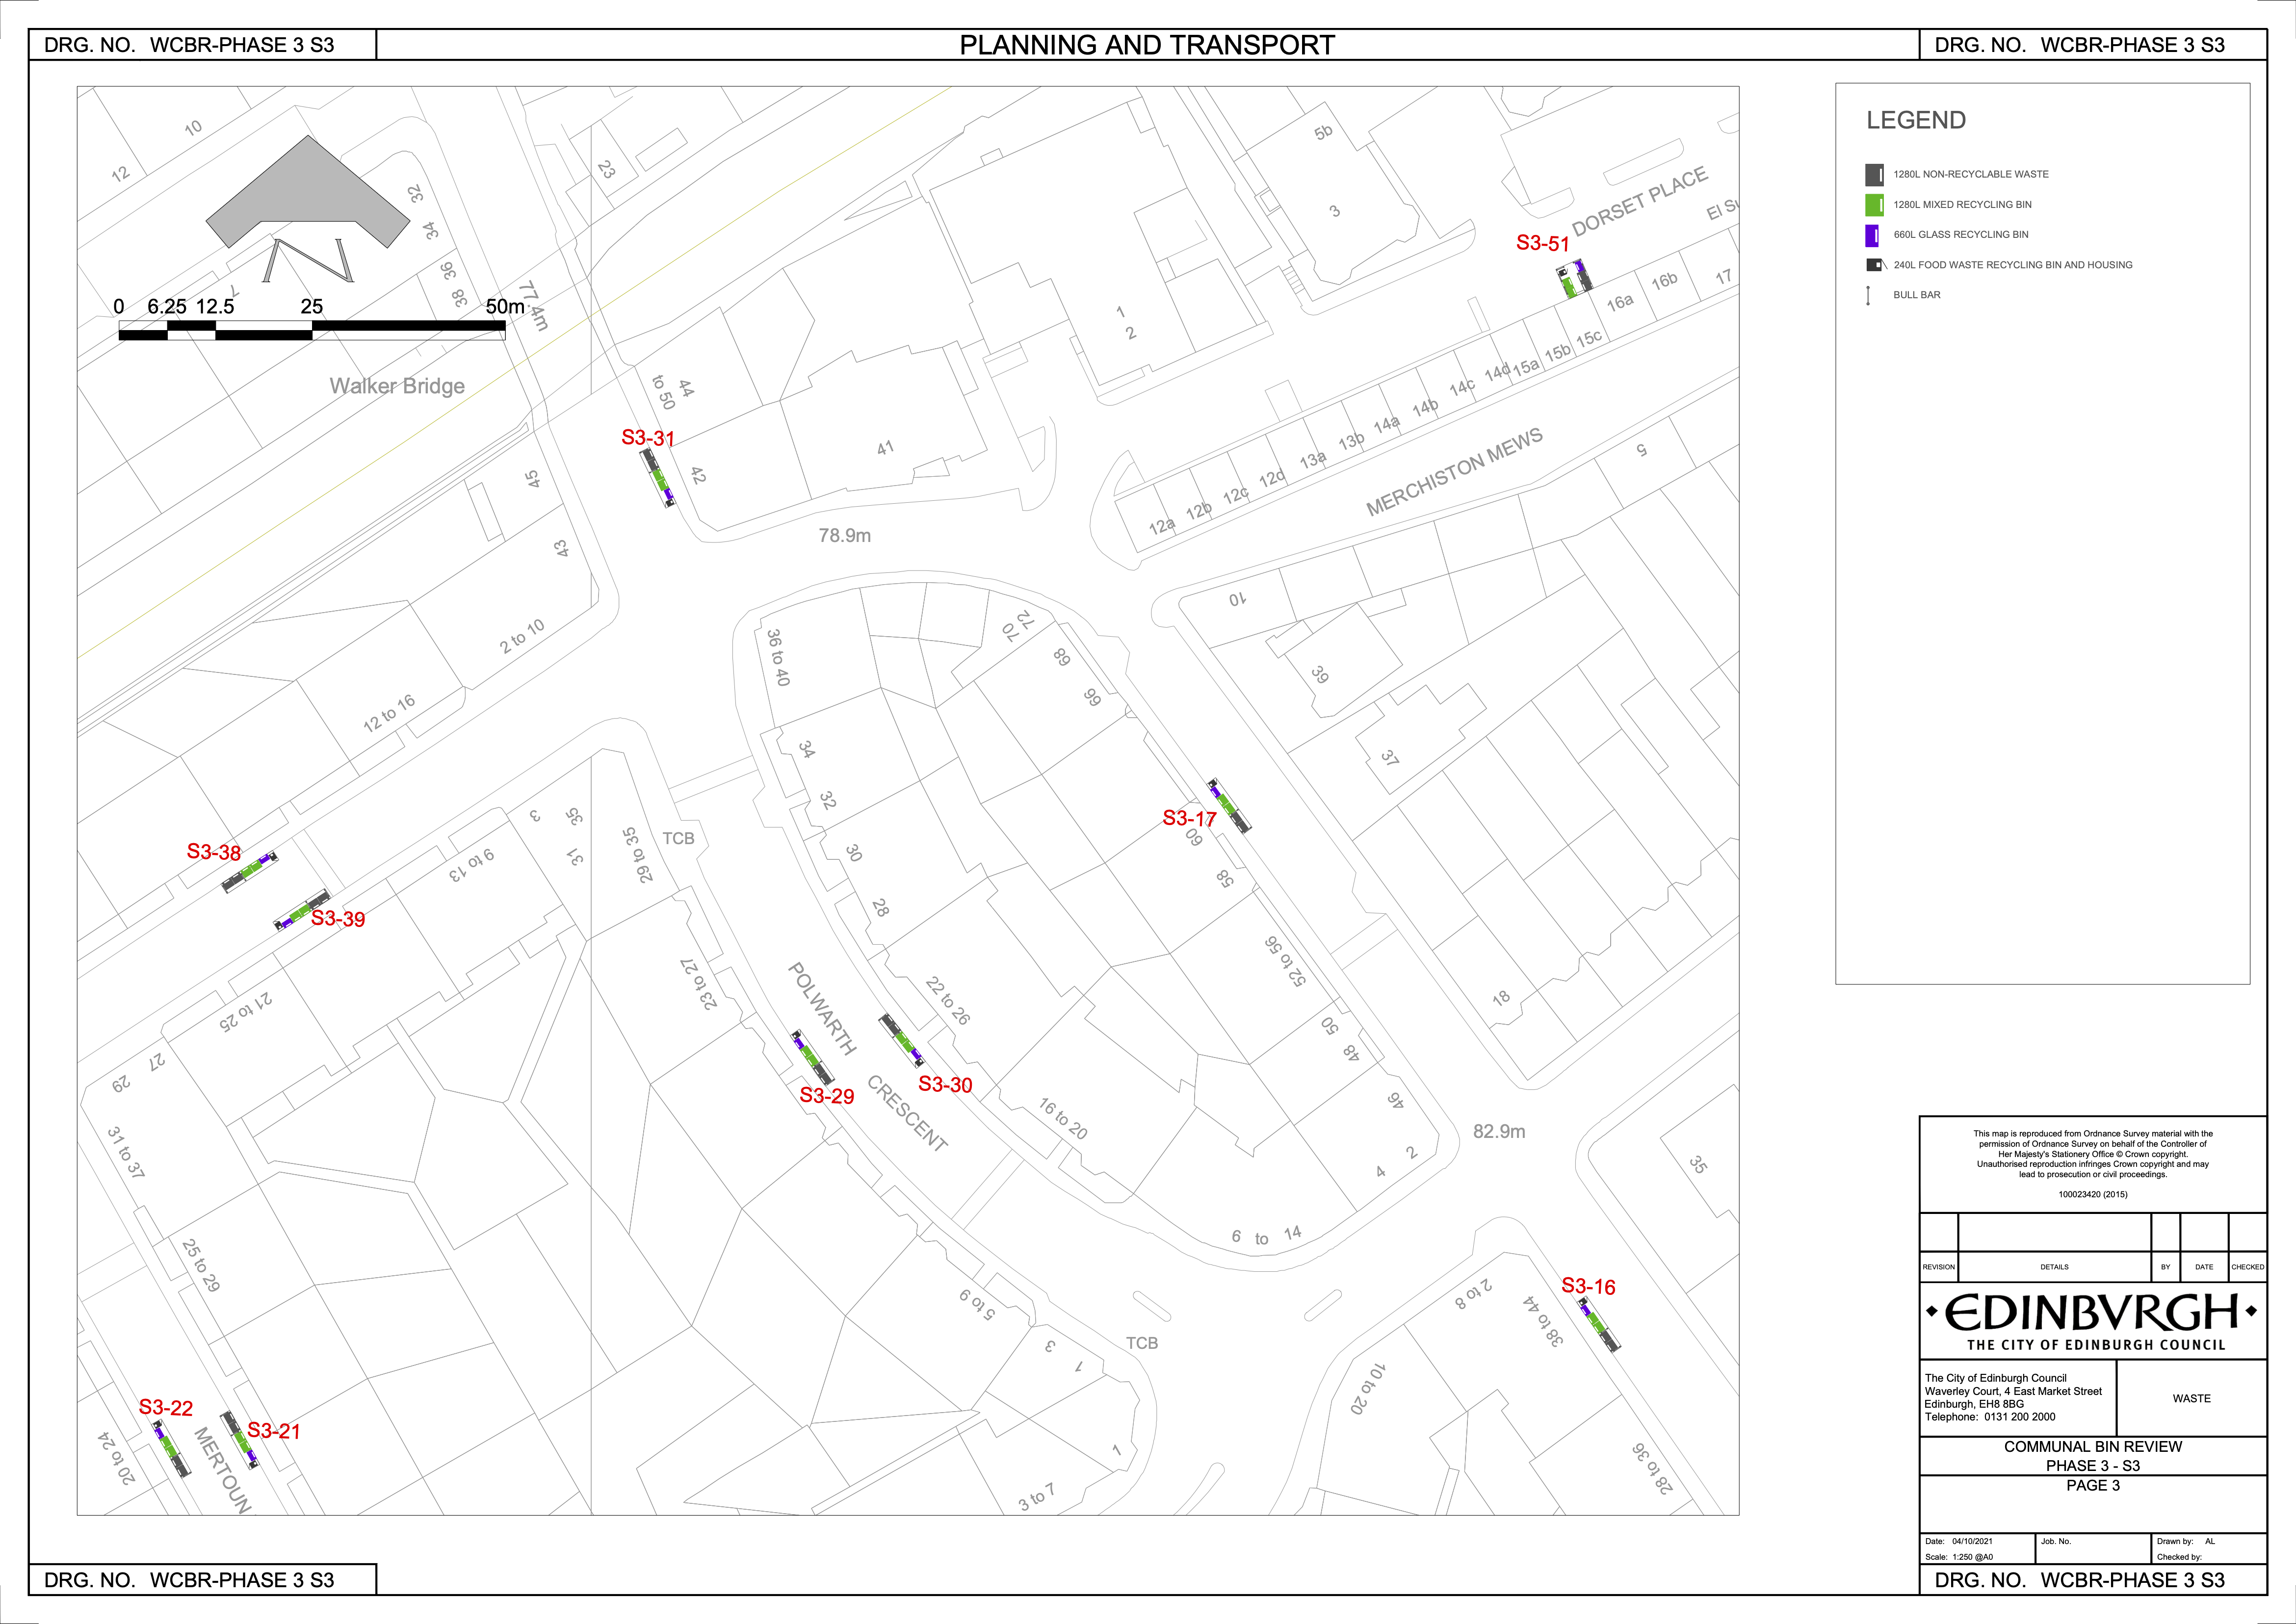 Map of the location of new bin hubs on Polwarth Crescent